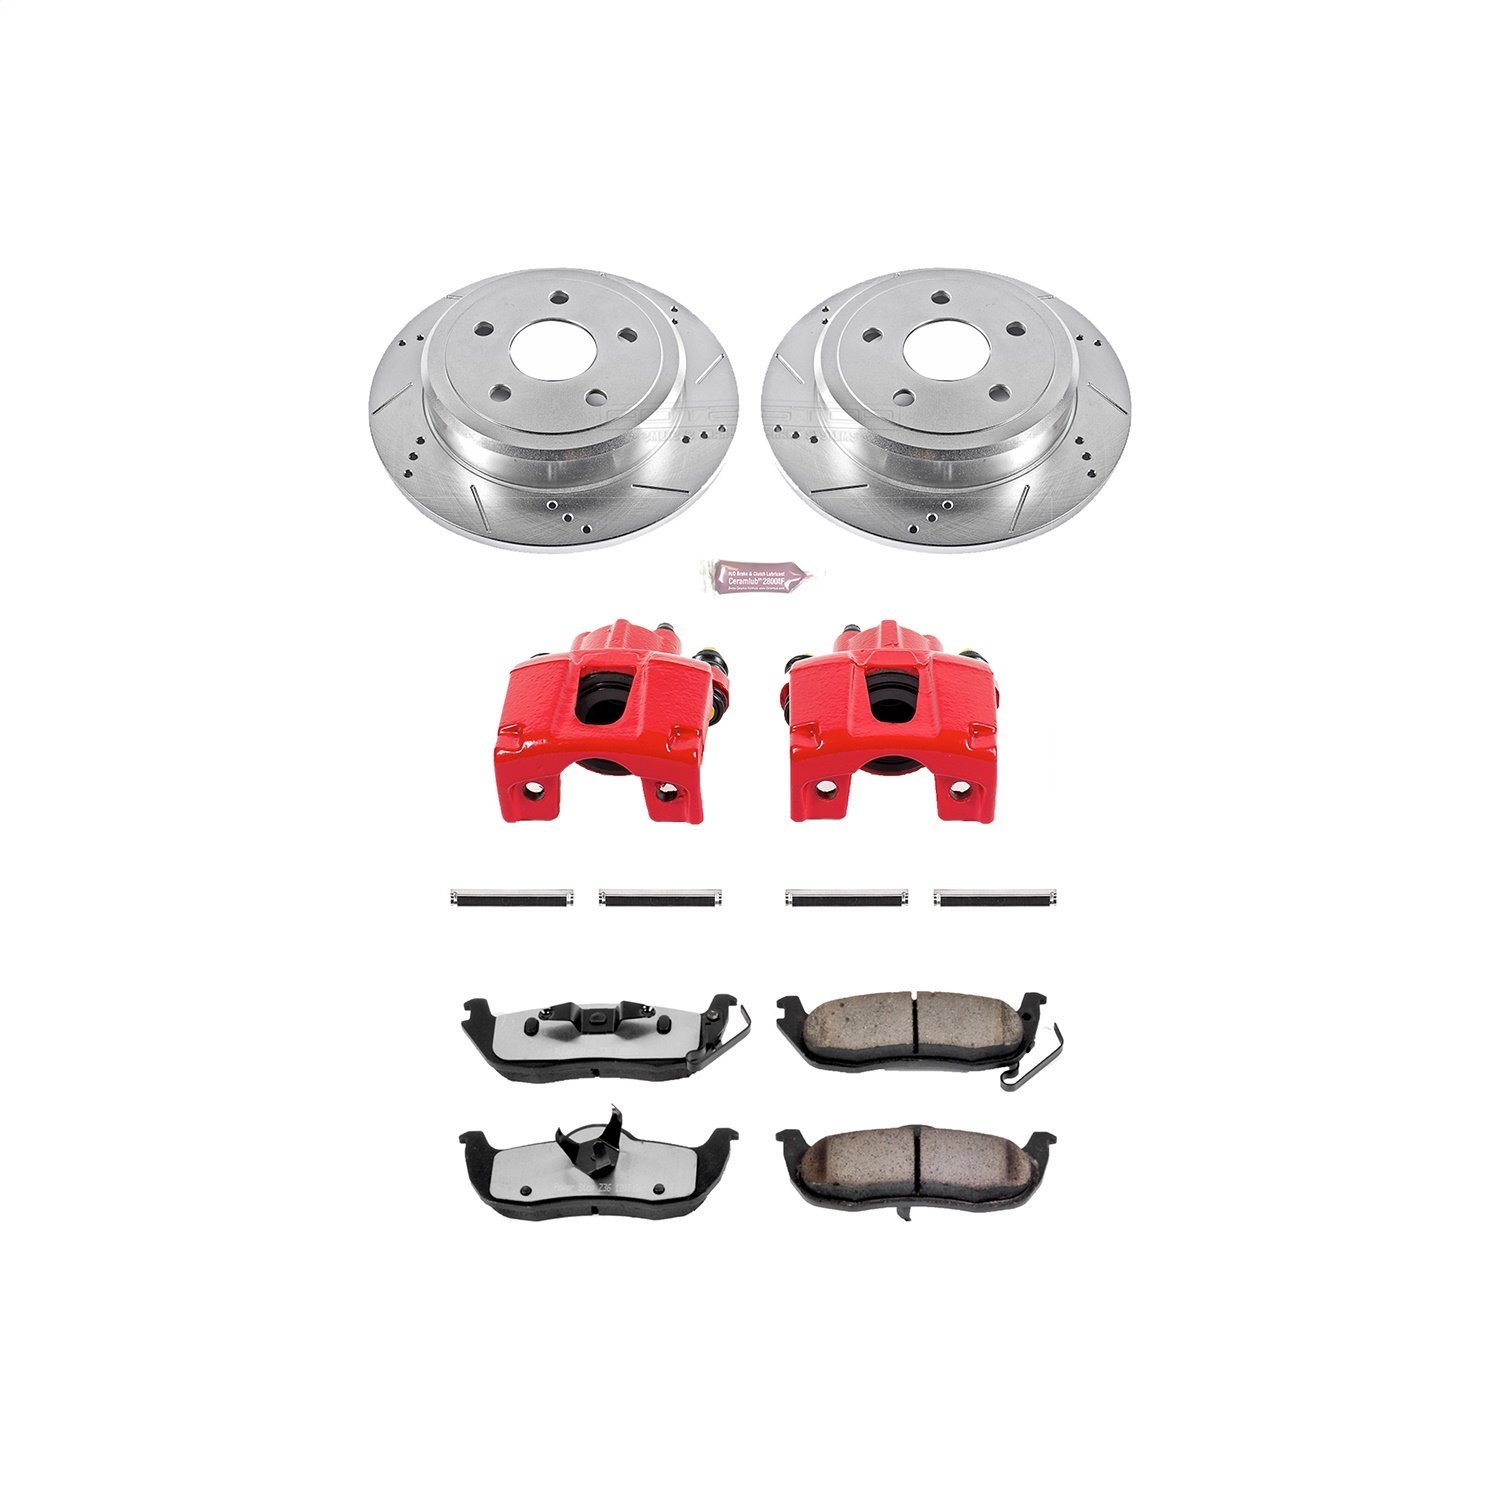 Truck and Towing Z36 Brake Upgrade Kit Cross-Drilled and Slotted Rotors Z36 Carbon Ceramic Brake Pad